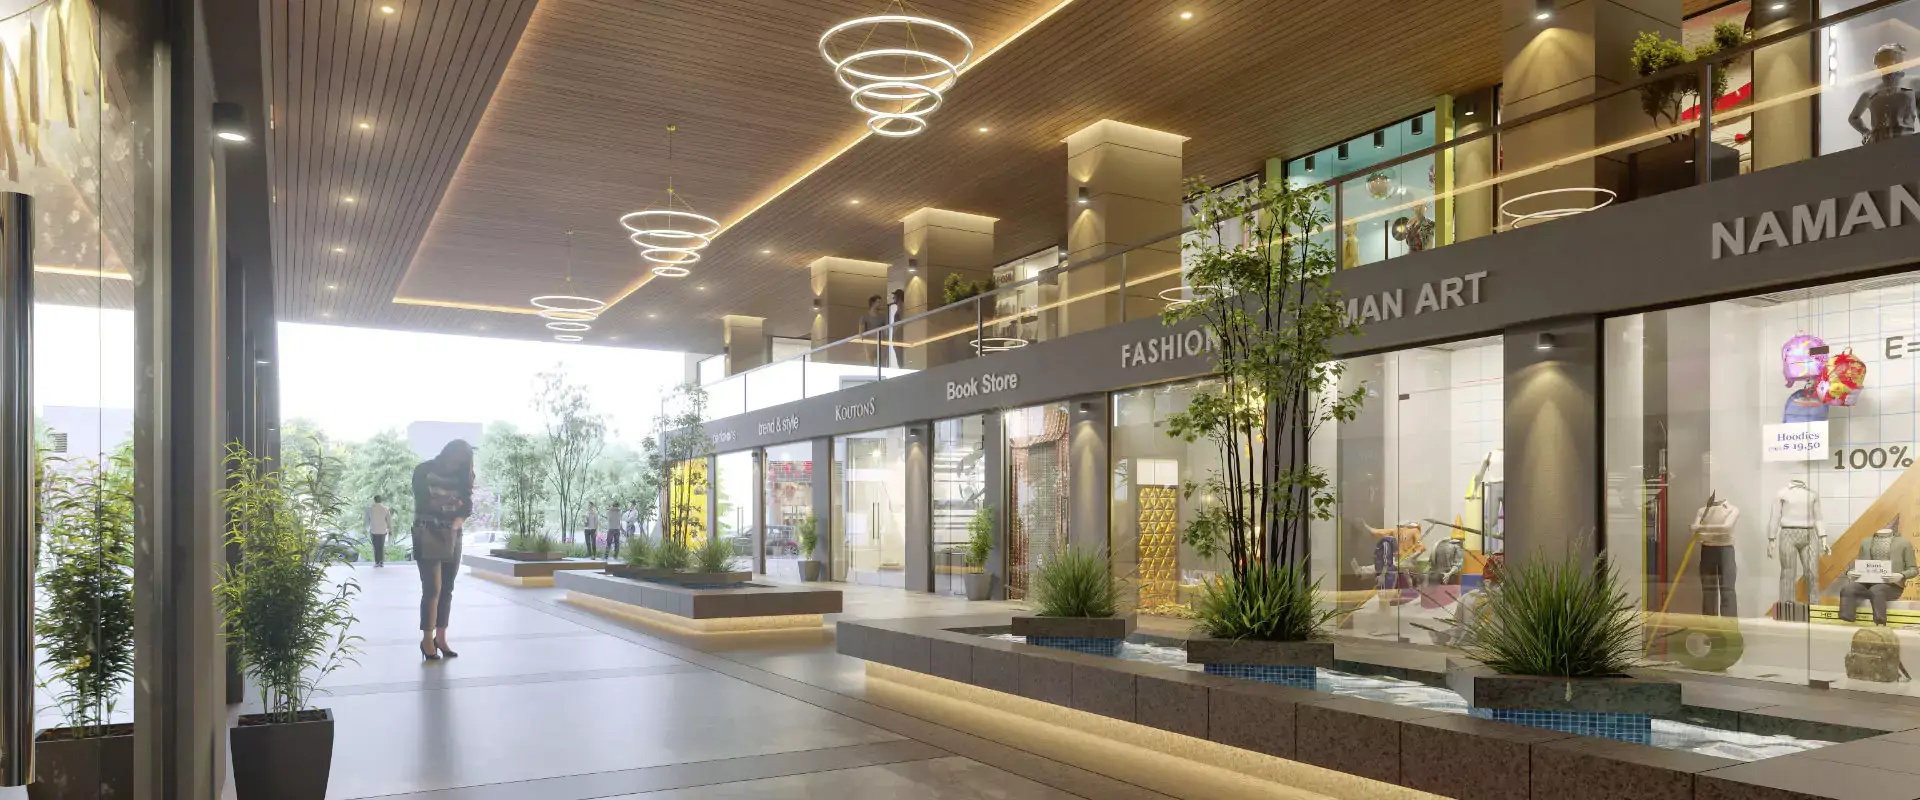 AMPLE SIT-OUTS GREENSCAPING& IMPRESSIVE LOBBY AREAS & RETAIL